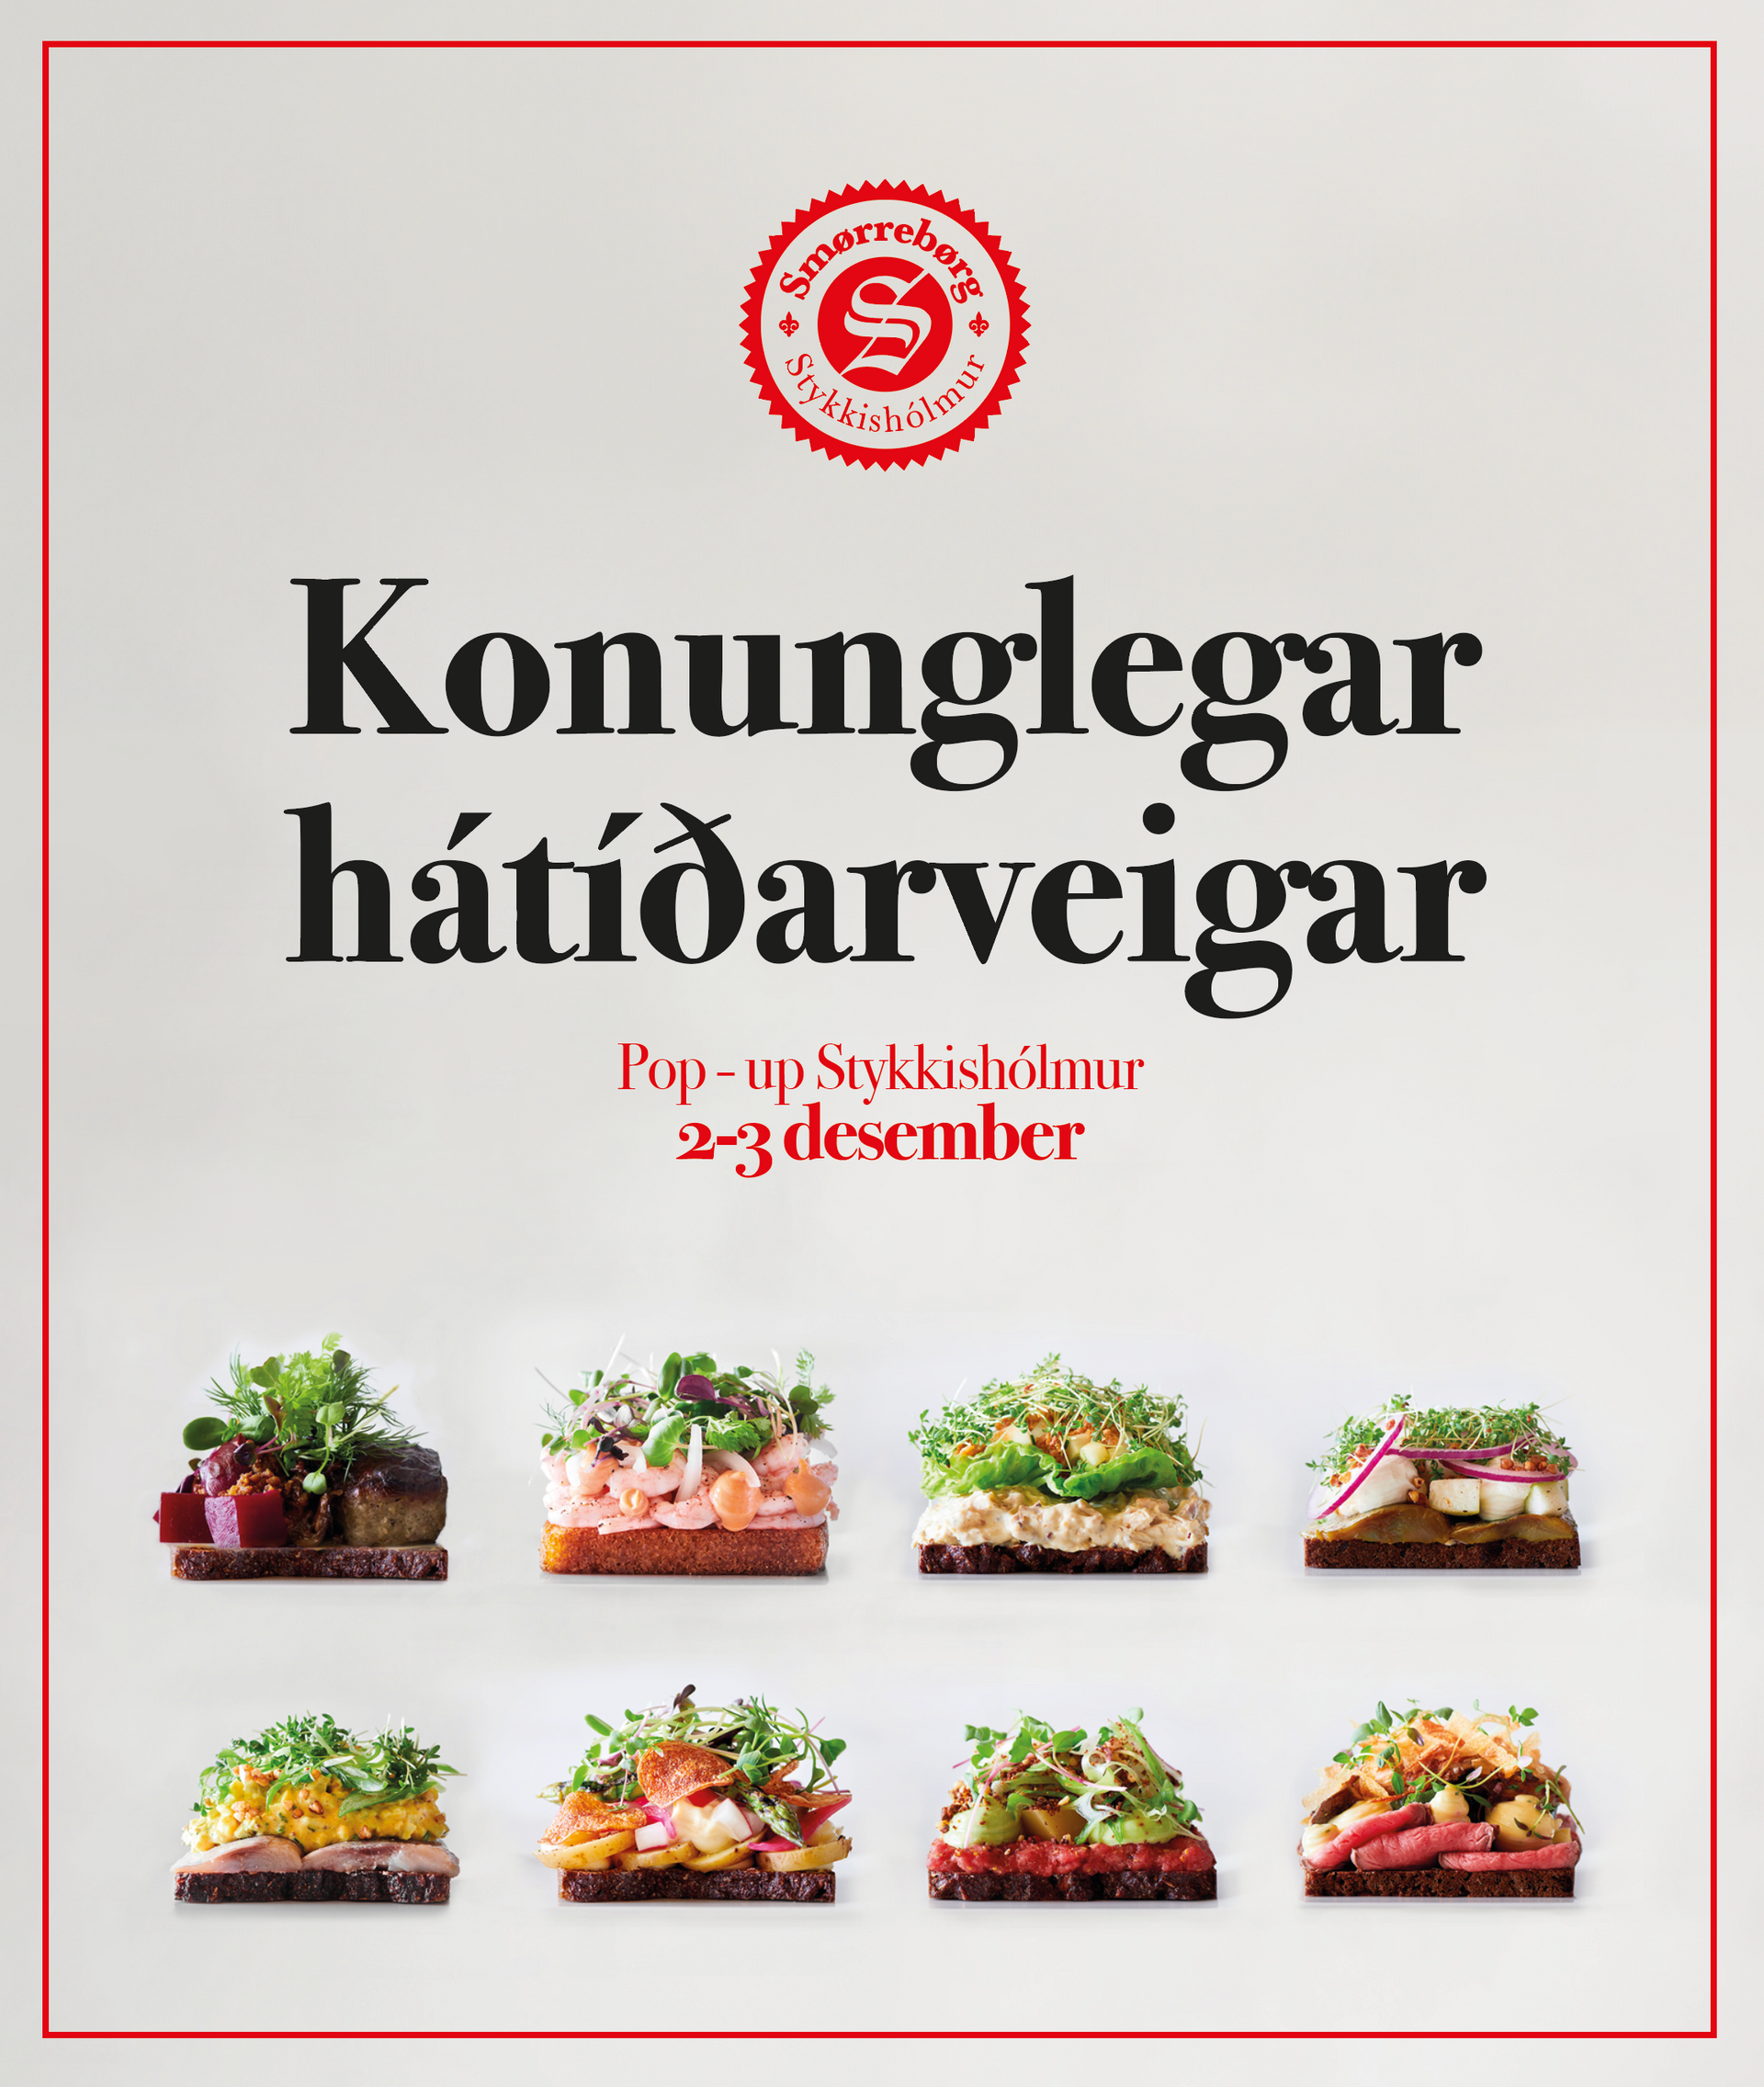 A poster with a picture of food and the words konungegar